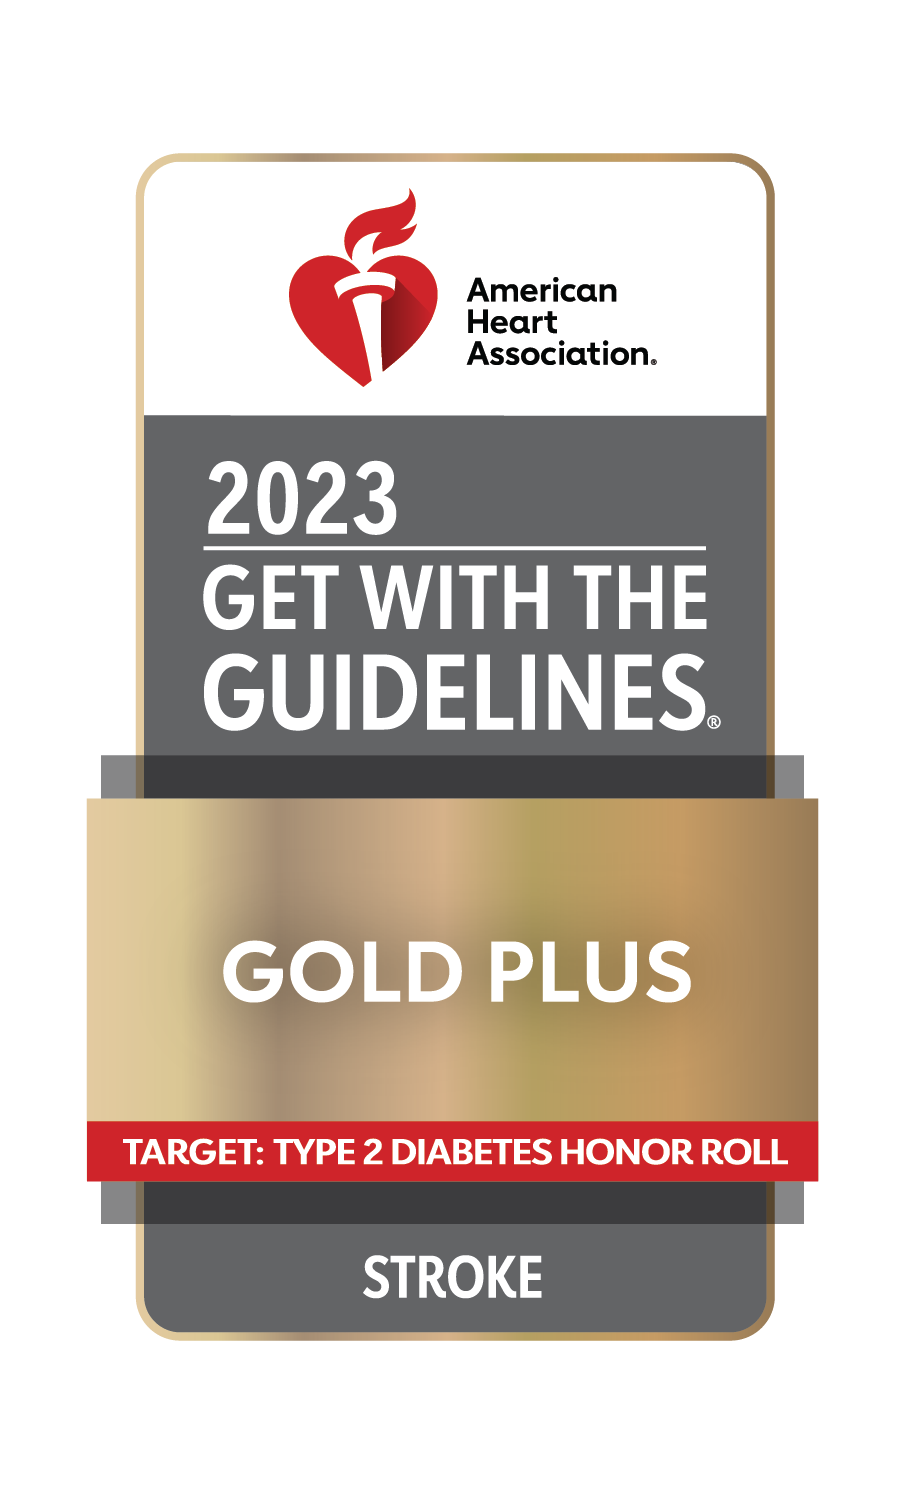 2023 American Heart Association Get With The Guidelines GOLD PLUS Award 